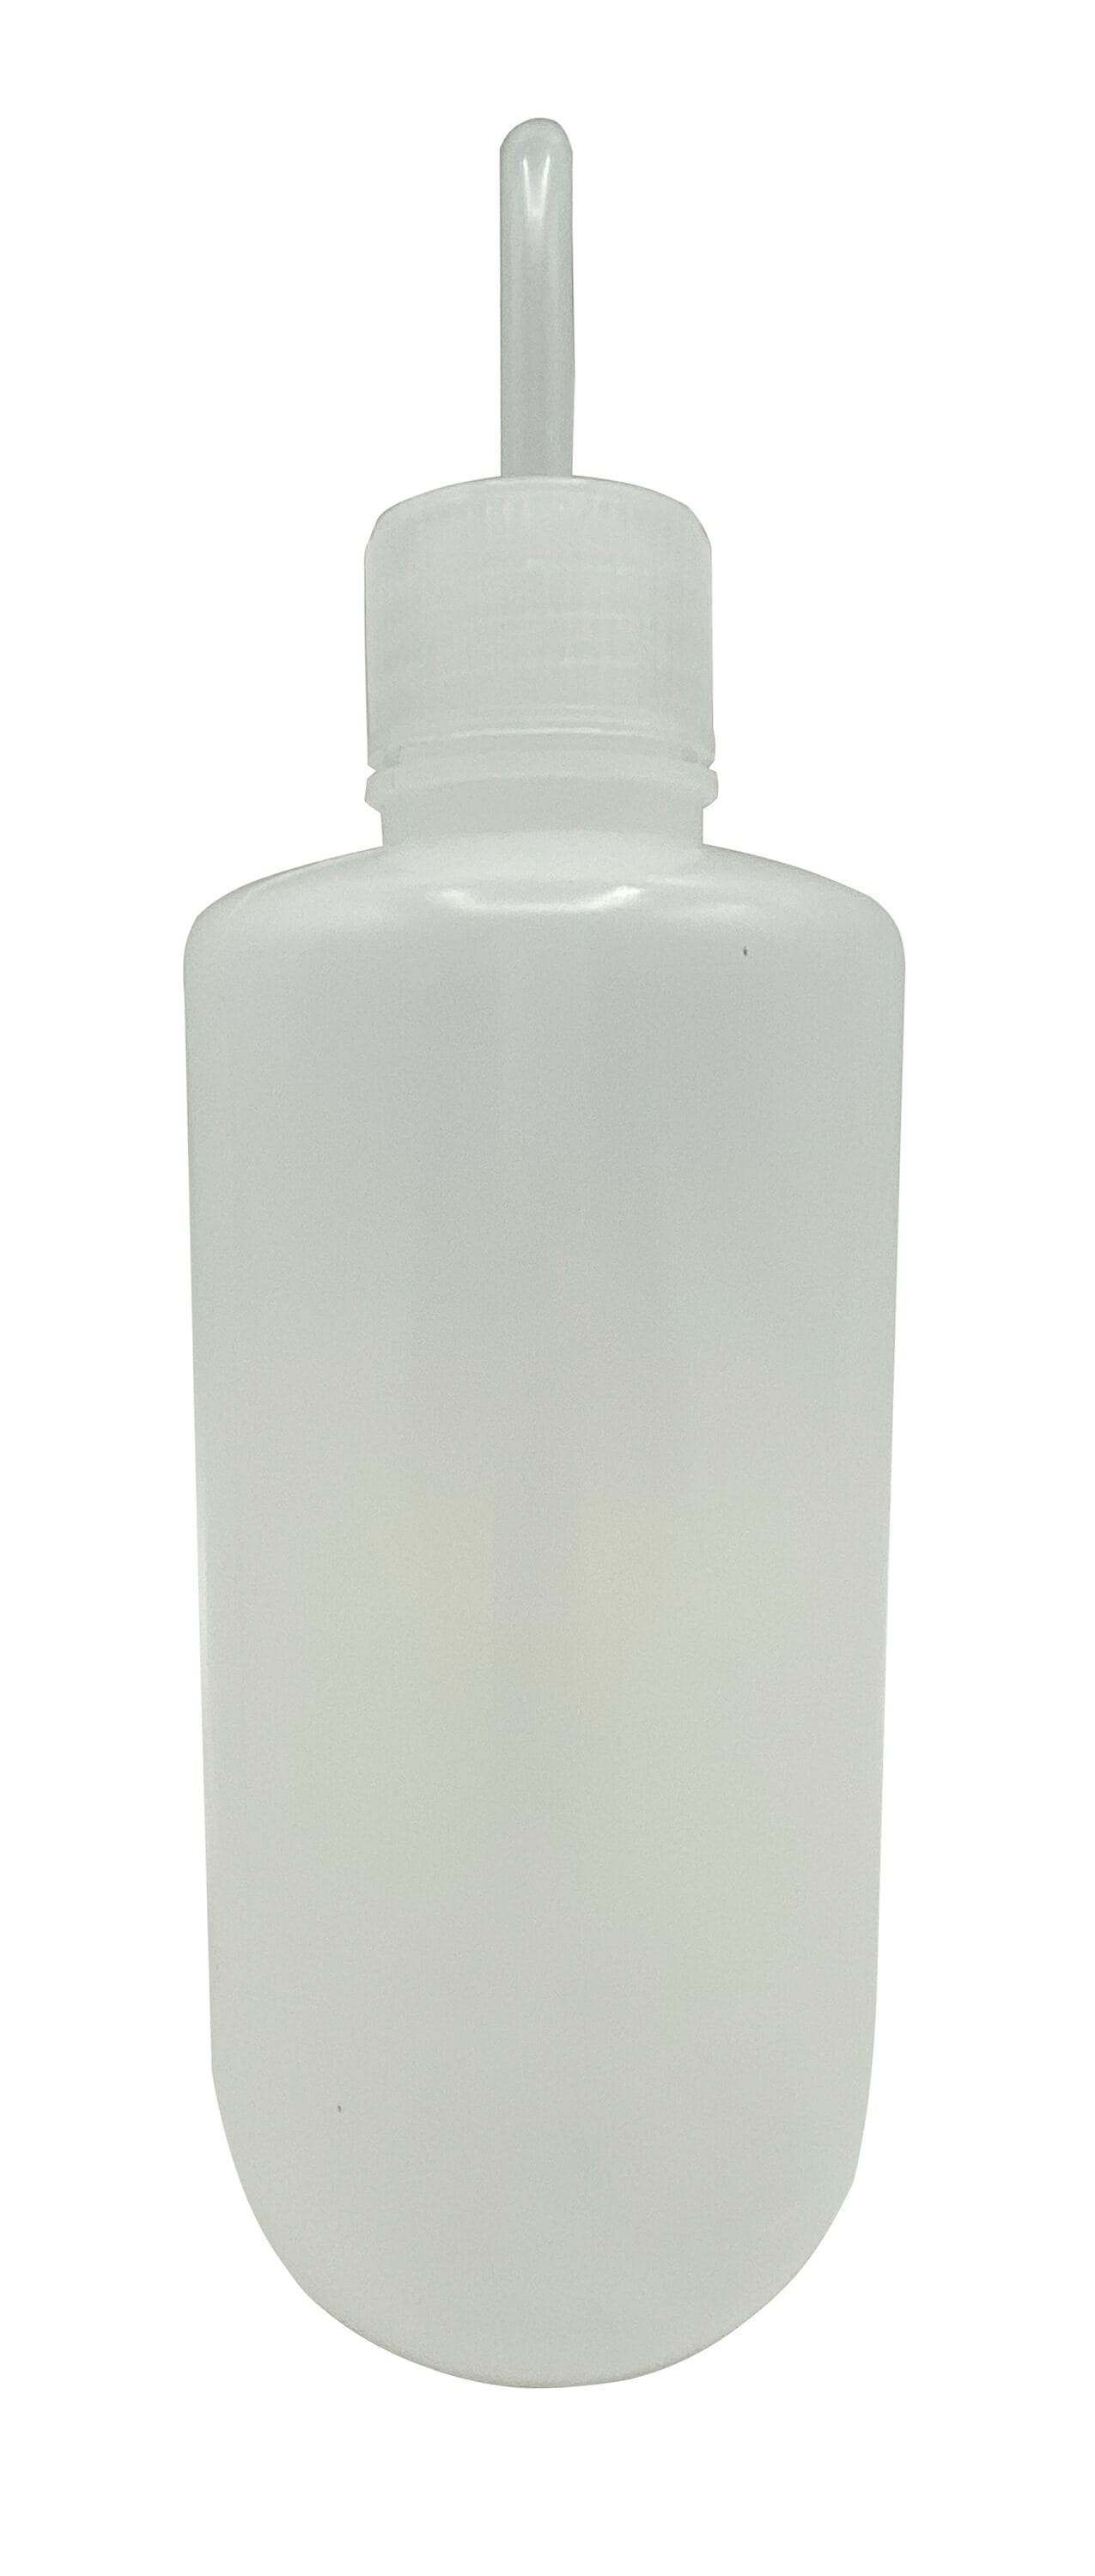 8 oz / 250 ml Clear Flask Style Bottles-White Caps - 4 pack